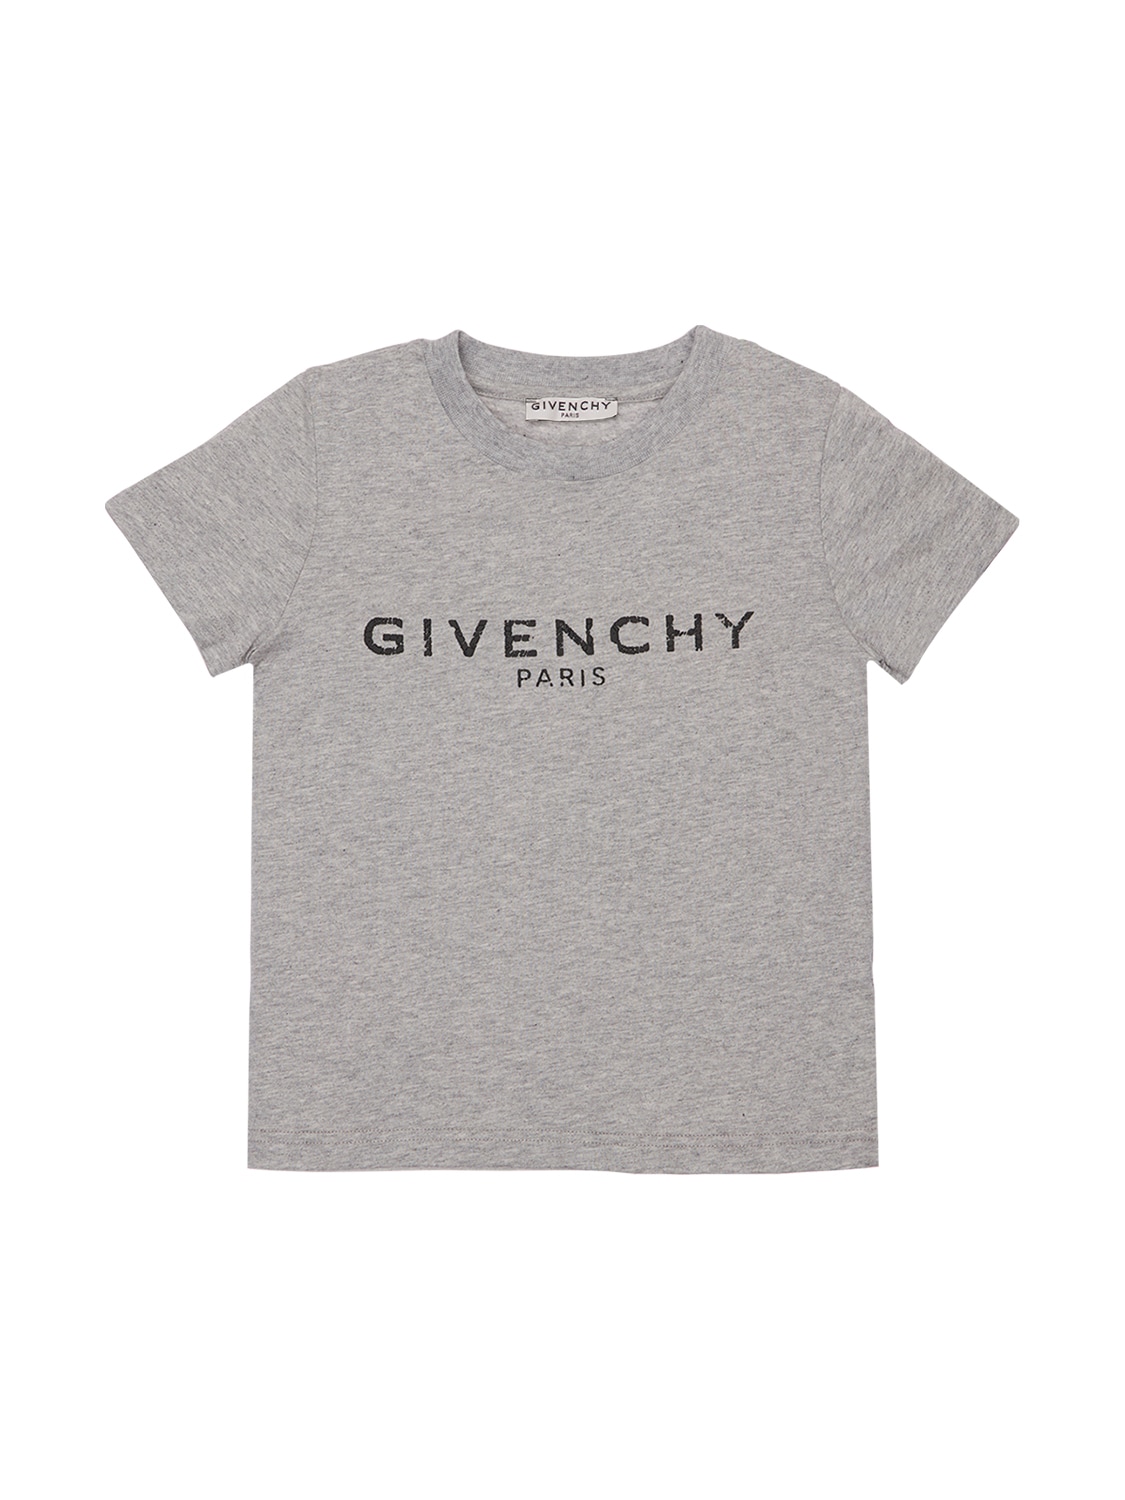 Givenchy Kids' Logo Printed Cotton Jersey T-shirt In Grey